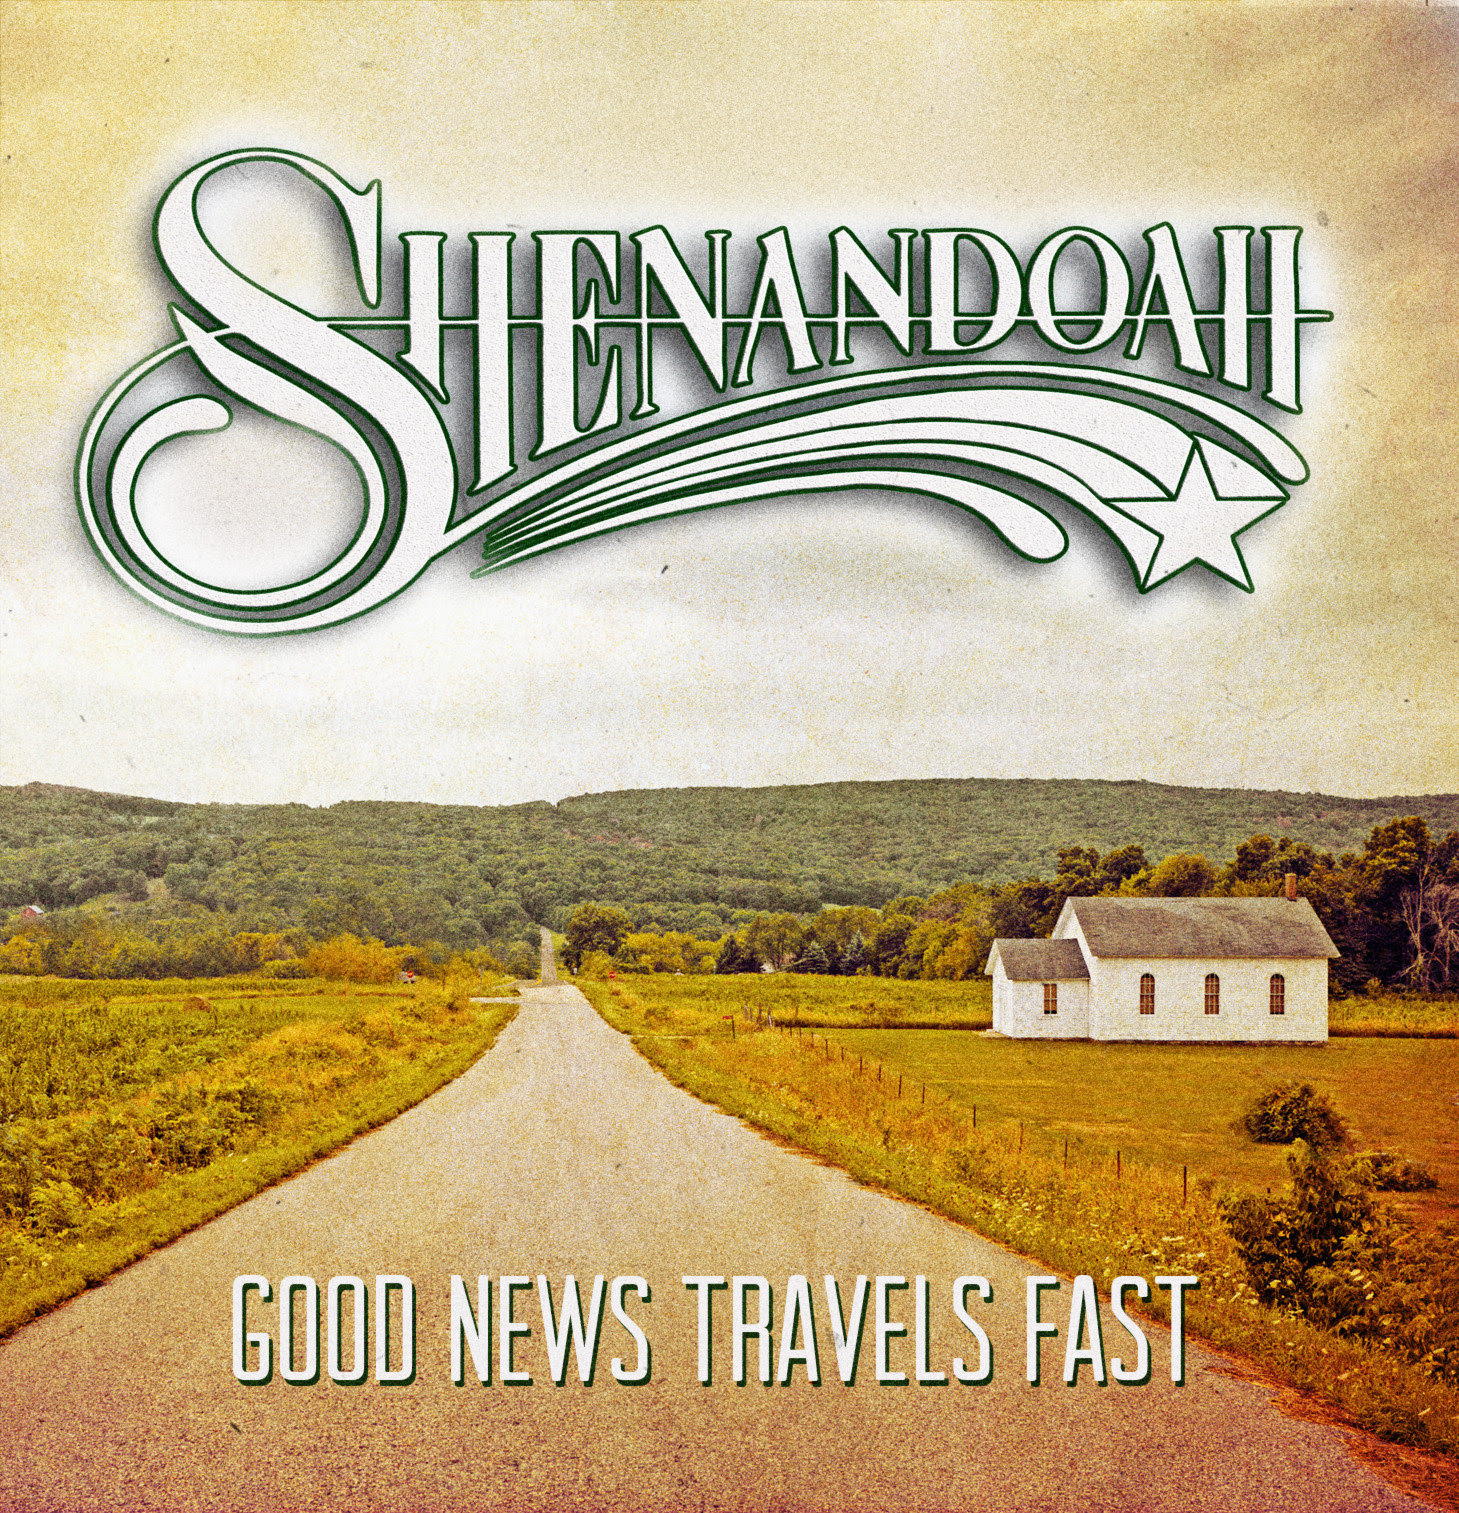 Daywind Roots Announces Release of Good News Travels Fast by Shenandoah